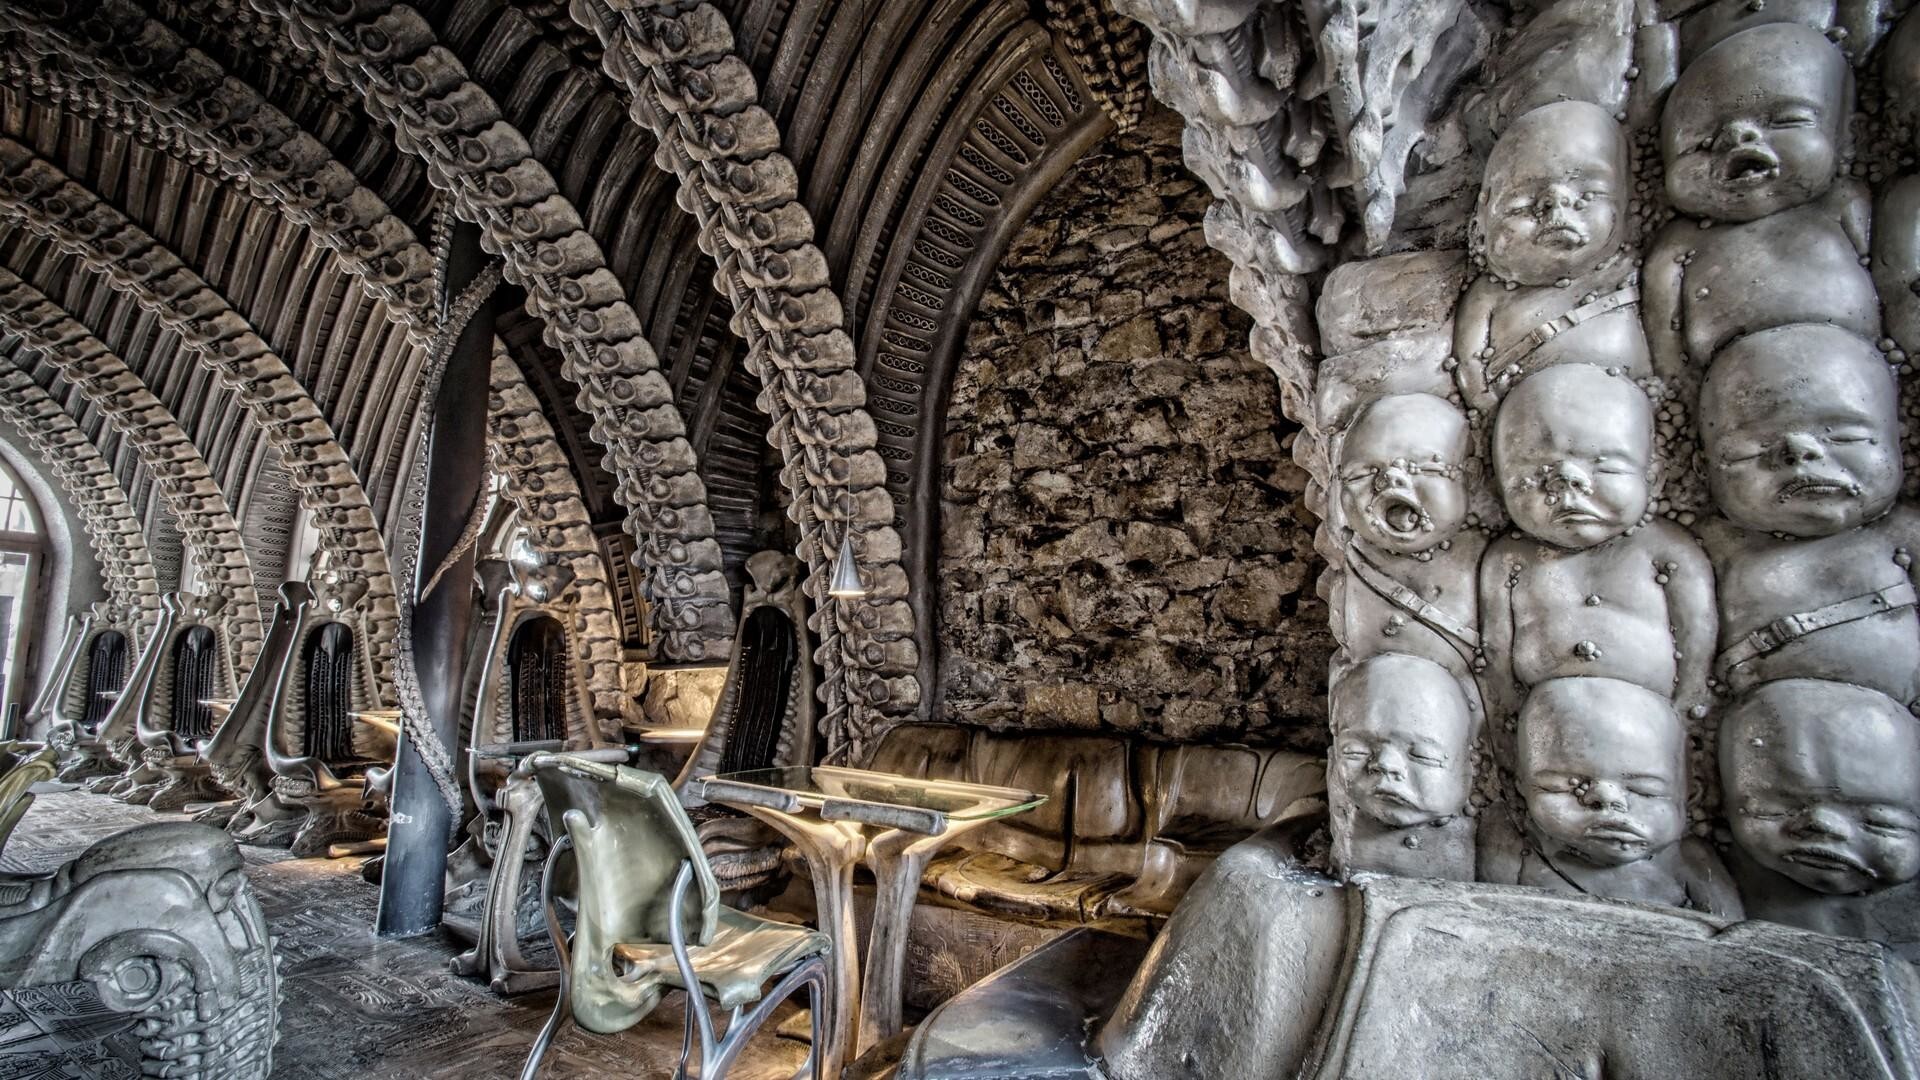 H.R. Giger: Themed Restaurant Dedicated To The Alien Universe. 1920x1080 Full HD Background.